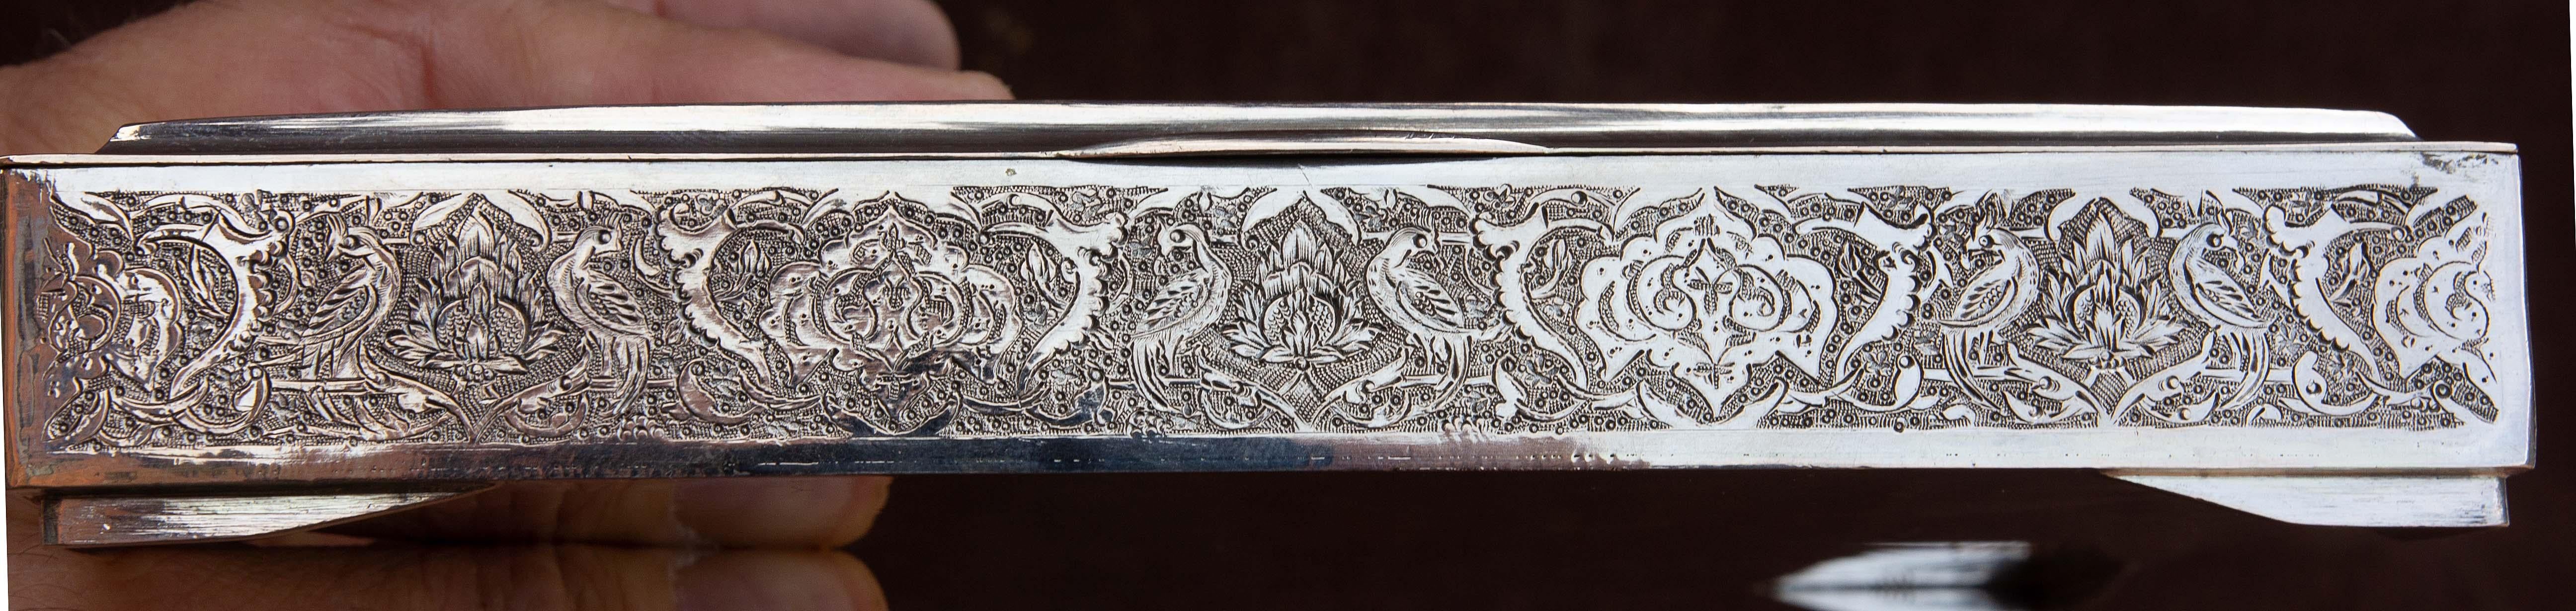 Unknown Antique Persian Silver Engraved Box For Sale